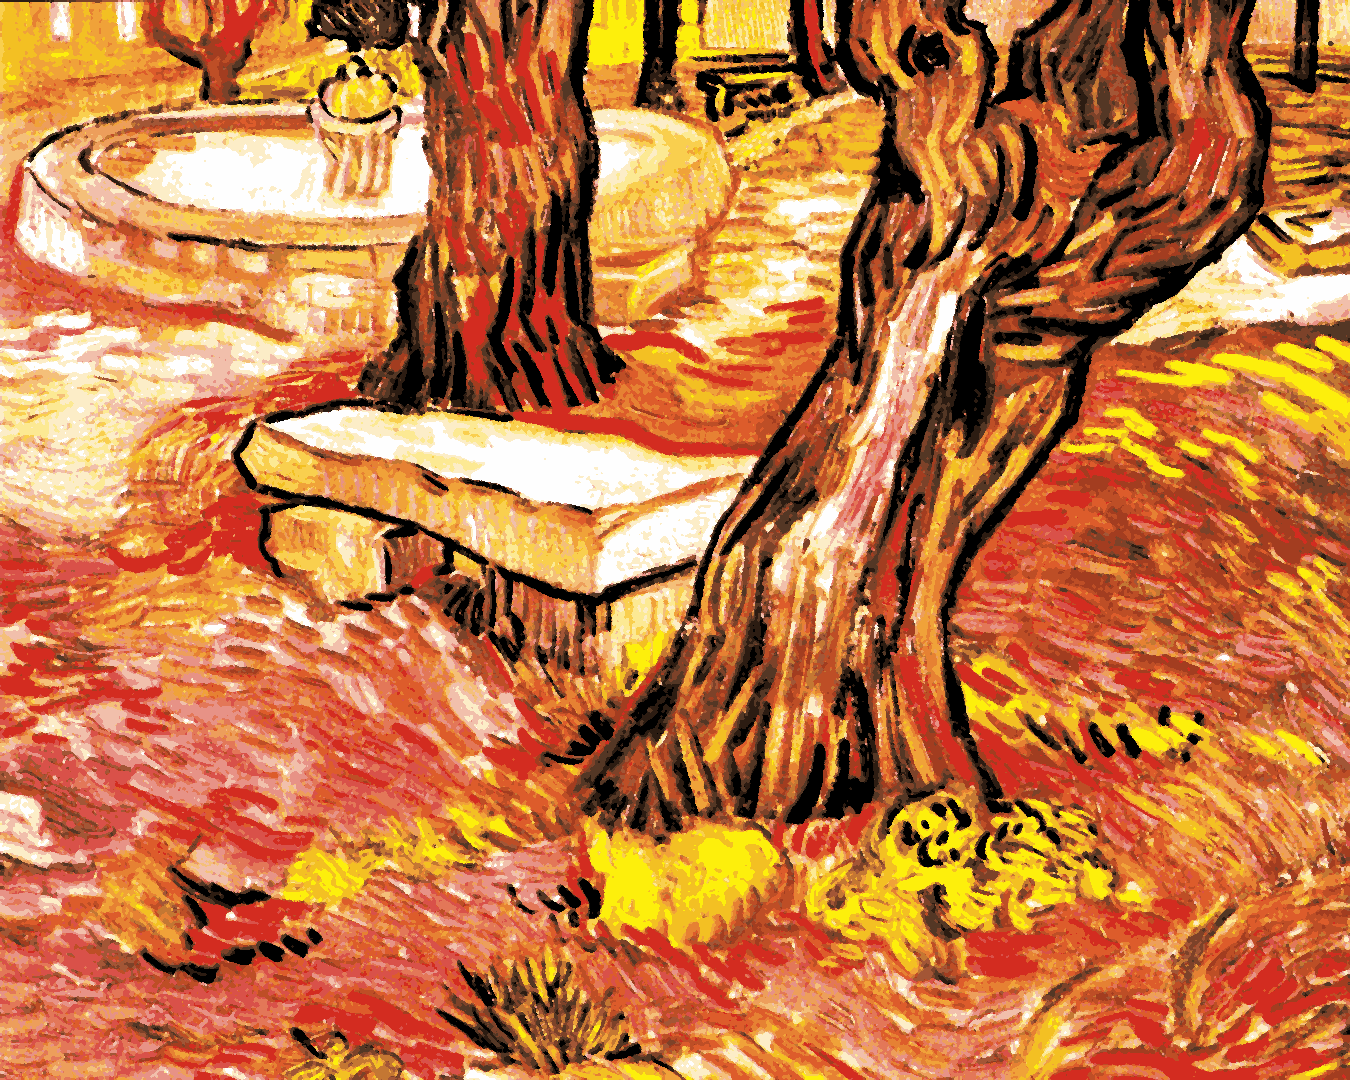 Vincent Van Gogh PD - (163) - The Stone Bench in the Garden of Saint-Paul Hospital - Van-Go Paint-By-Number Kit